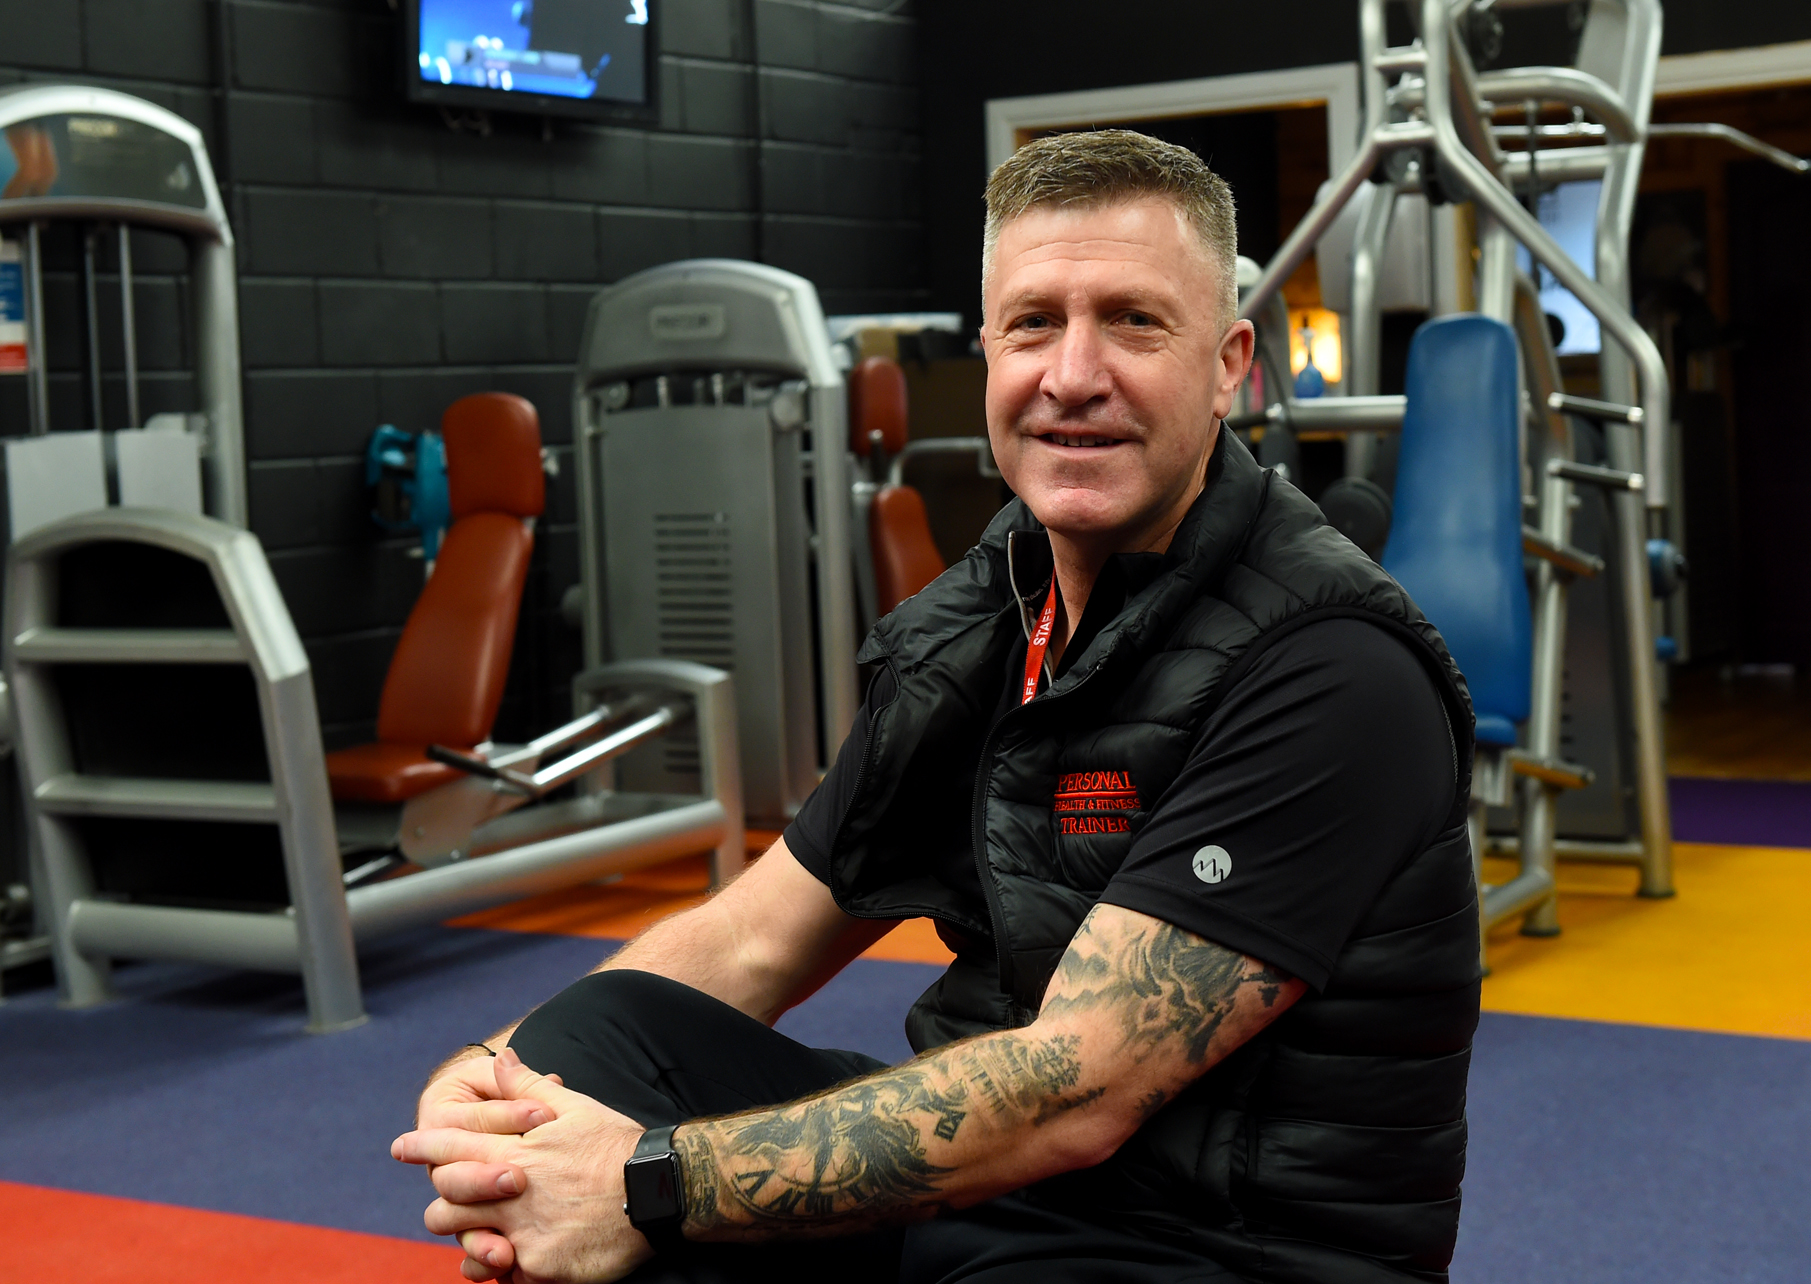 Local Business Profile; Personal Health & Fitness